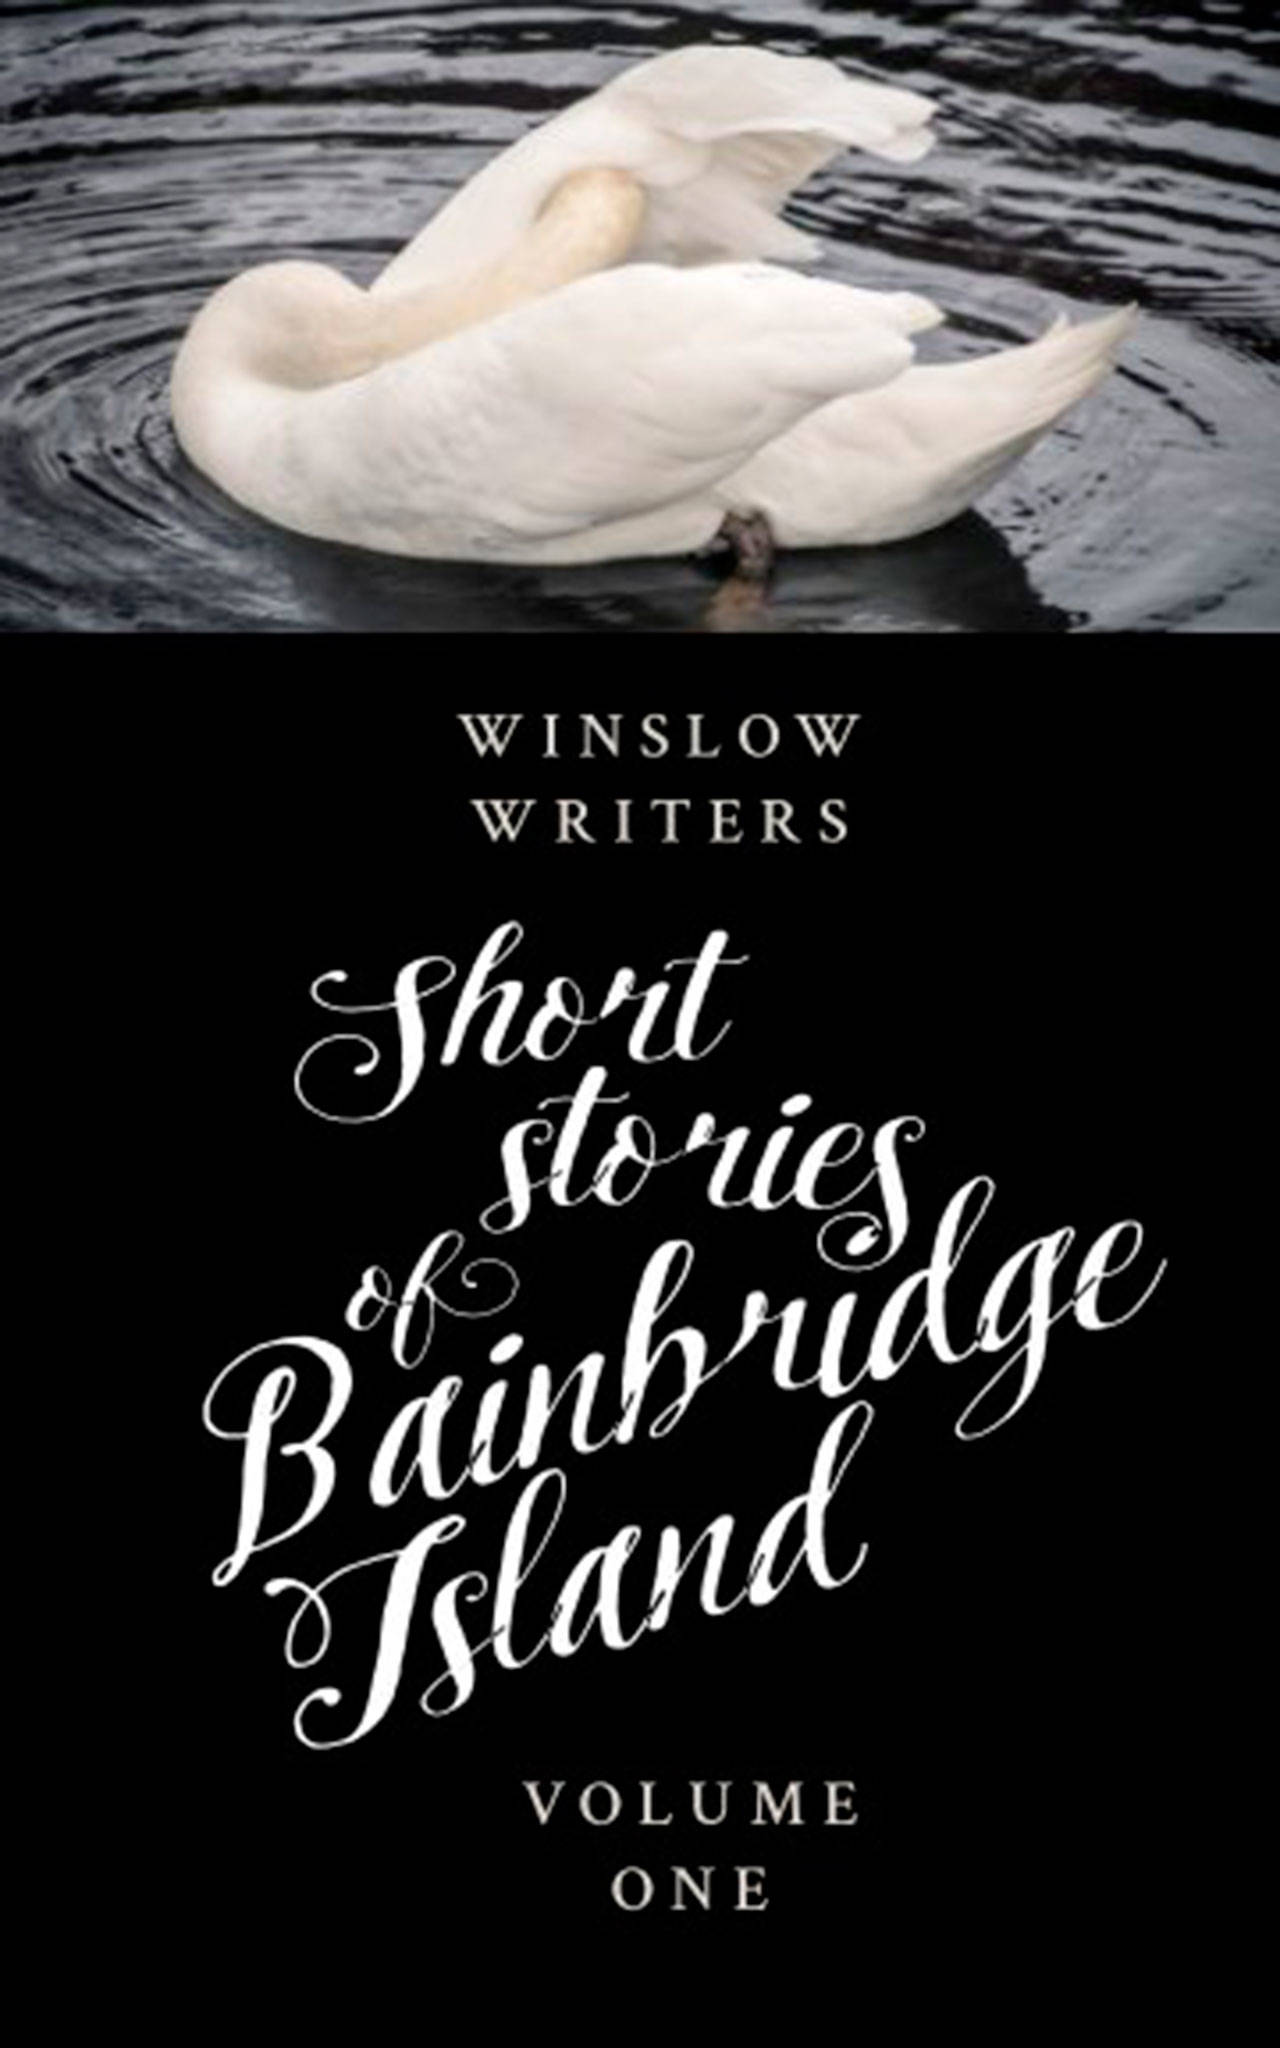 Image courtesy of Eagle Harbor Book Company | Eagle Harbor Book Company will host the local authors group Winslow Writers to celebrate the release of their first short story collection “Winslow Writers: Short Stories of Bainbridge Island” at 3 p.m. Sunday, Feb. 3.